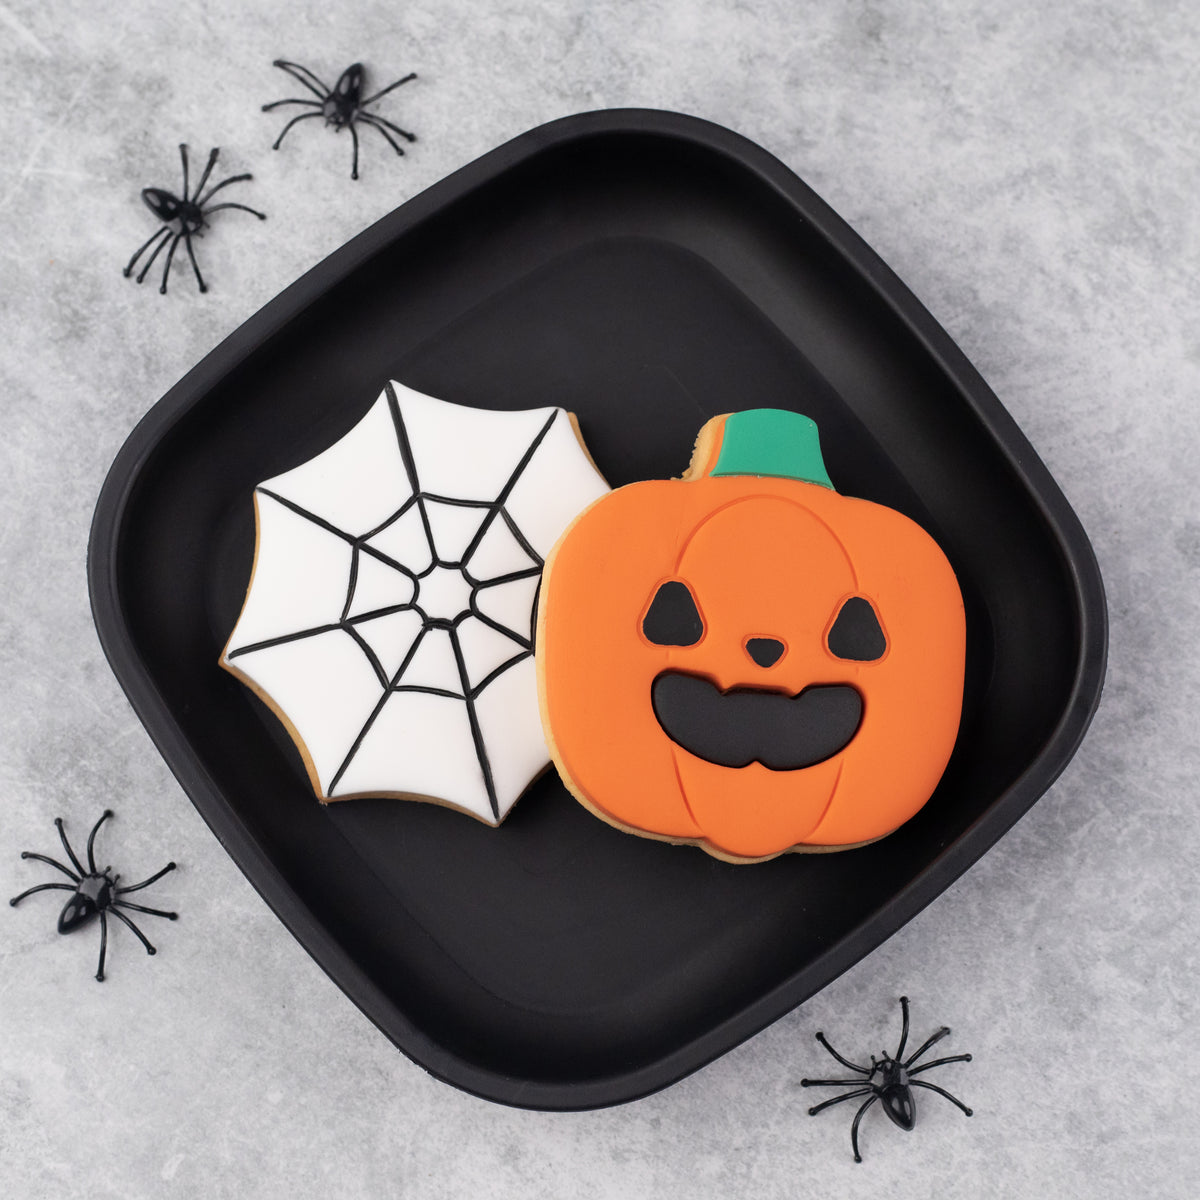 Lunch Punch Halloween Cutter and Bento Set